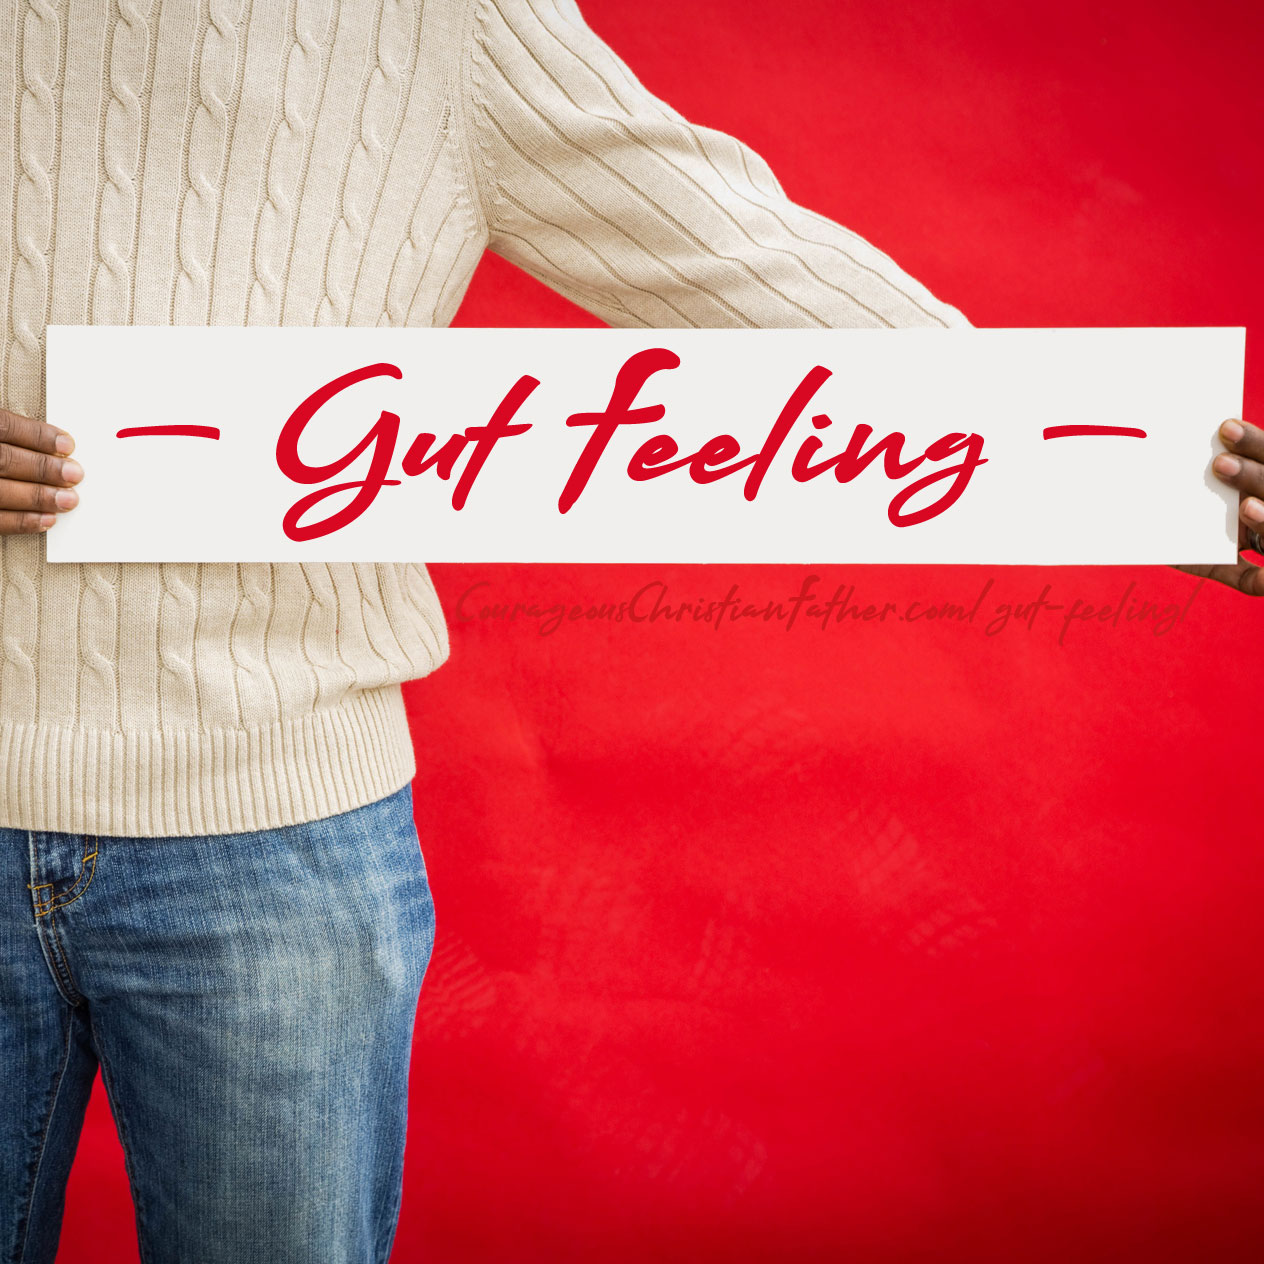 Gut Feeling - that feeling we get deep inside us that it seems to come from our gut. So what is it? #GutFeeling